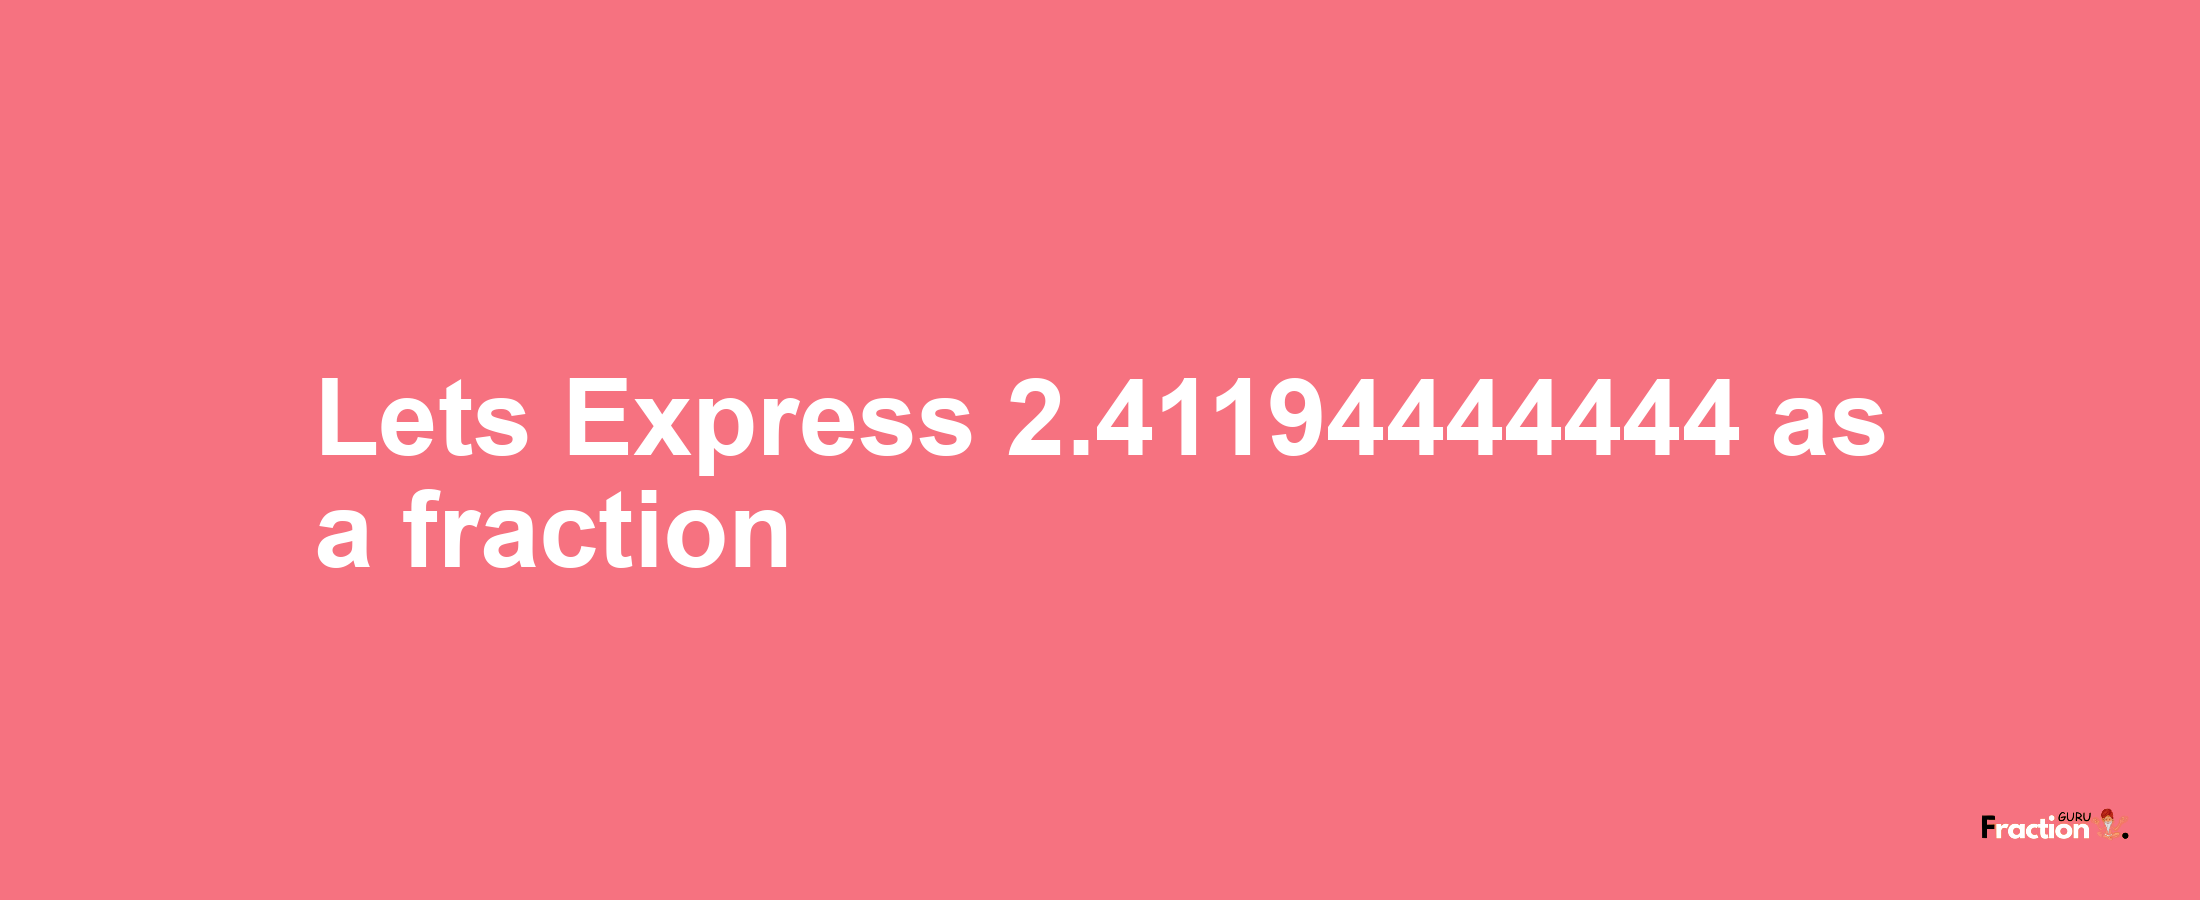 Lets Express 2.41194444444 as afraction